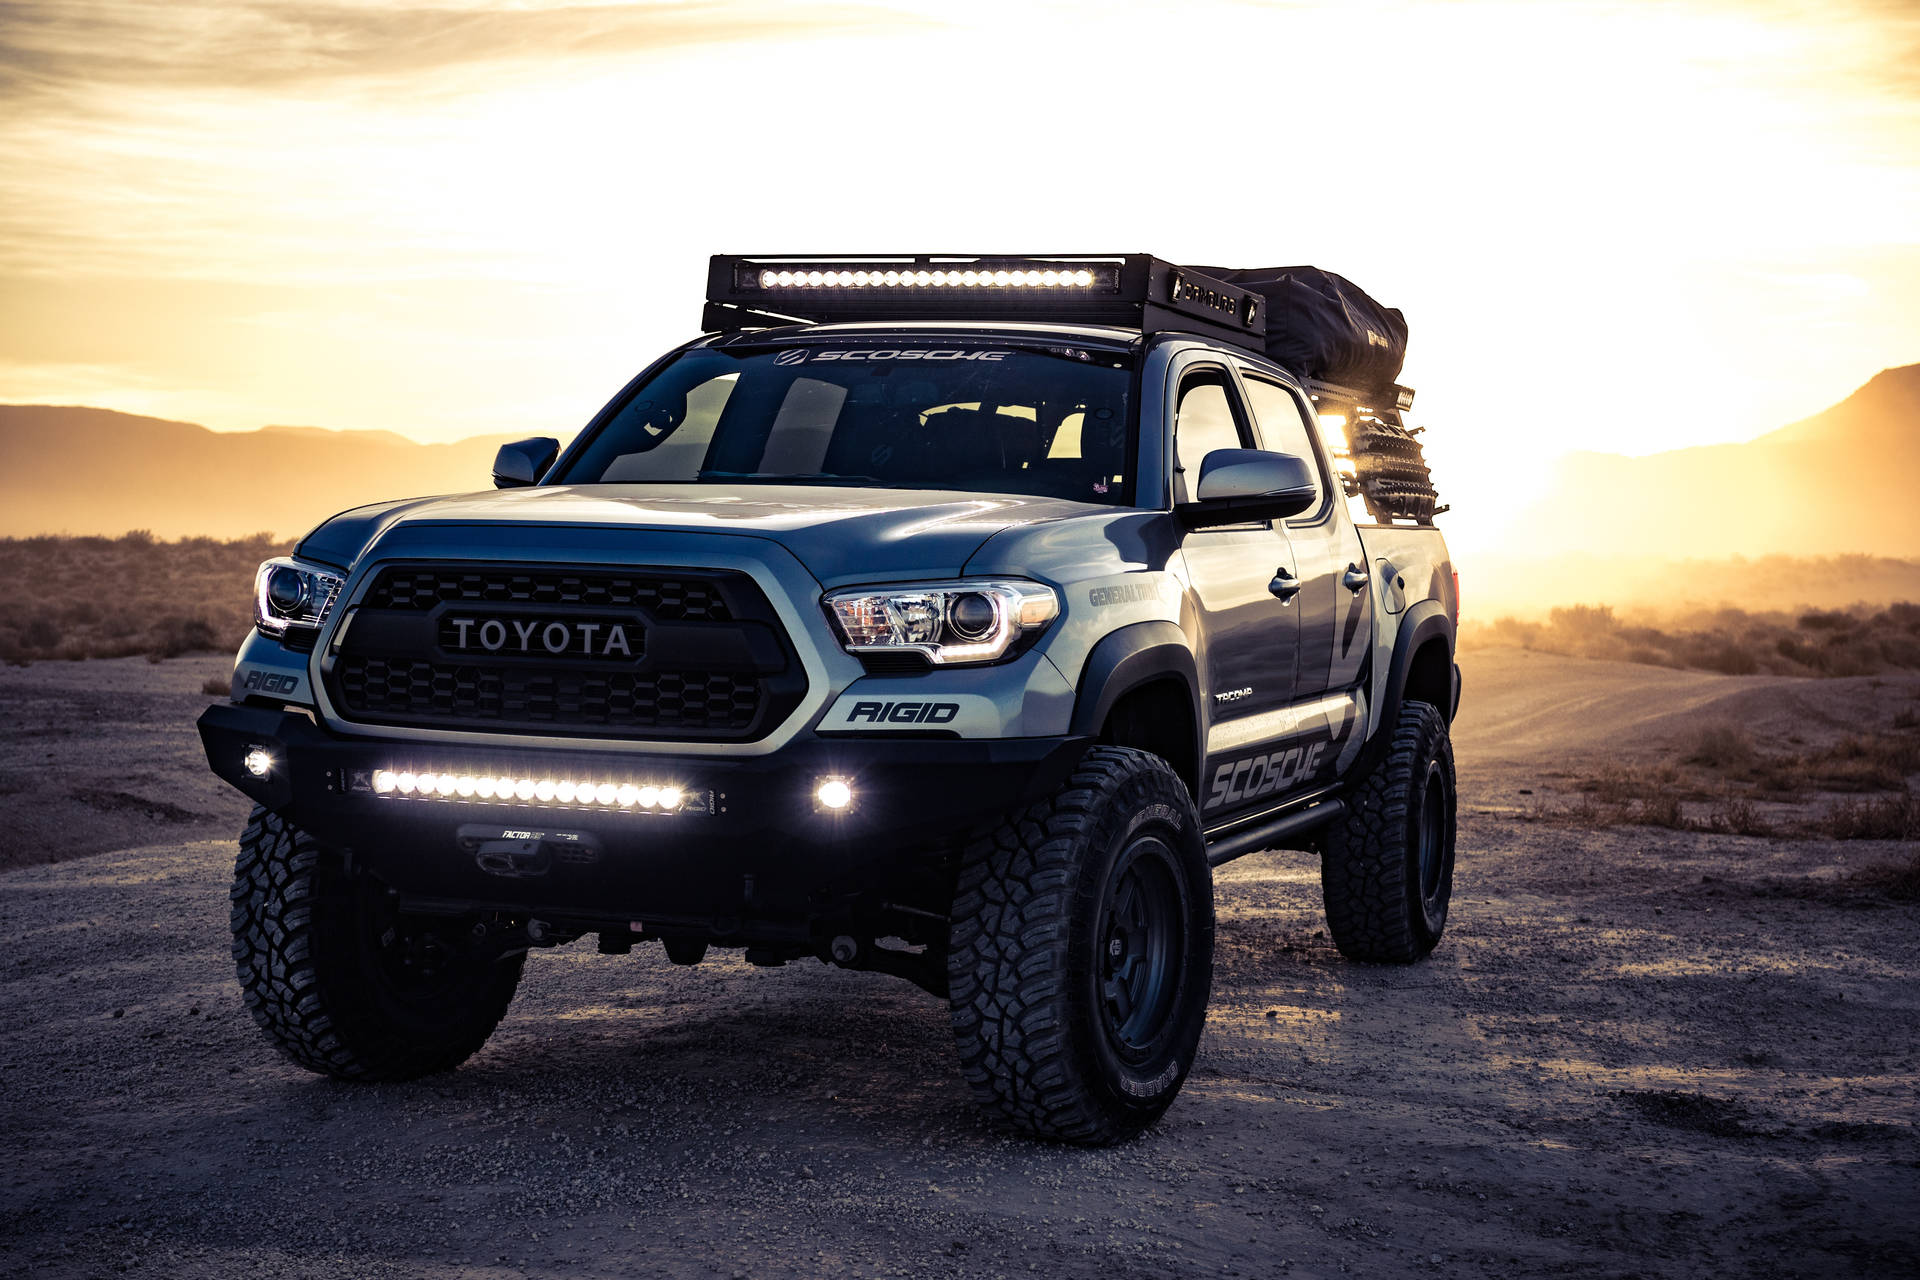 Toyota 5472X3648 Wallpaper and Background Image